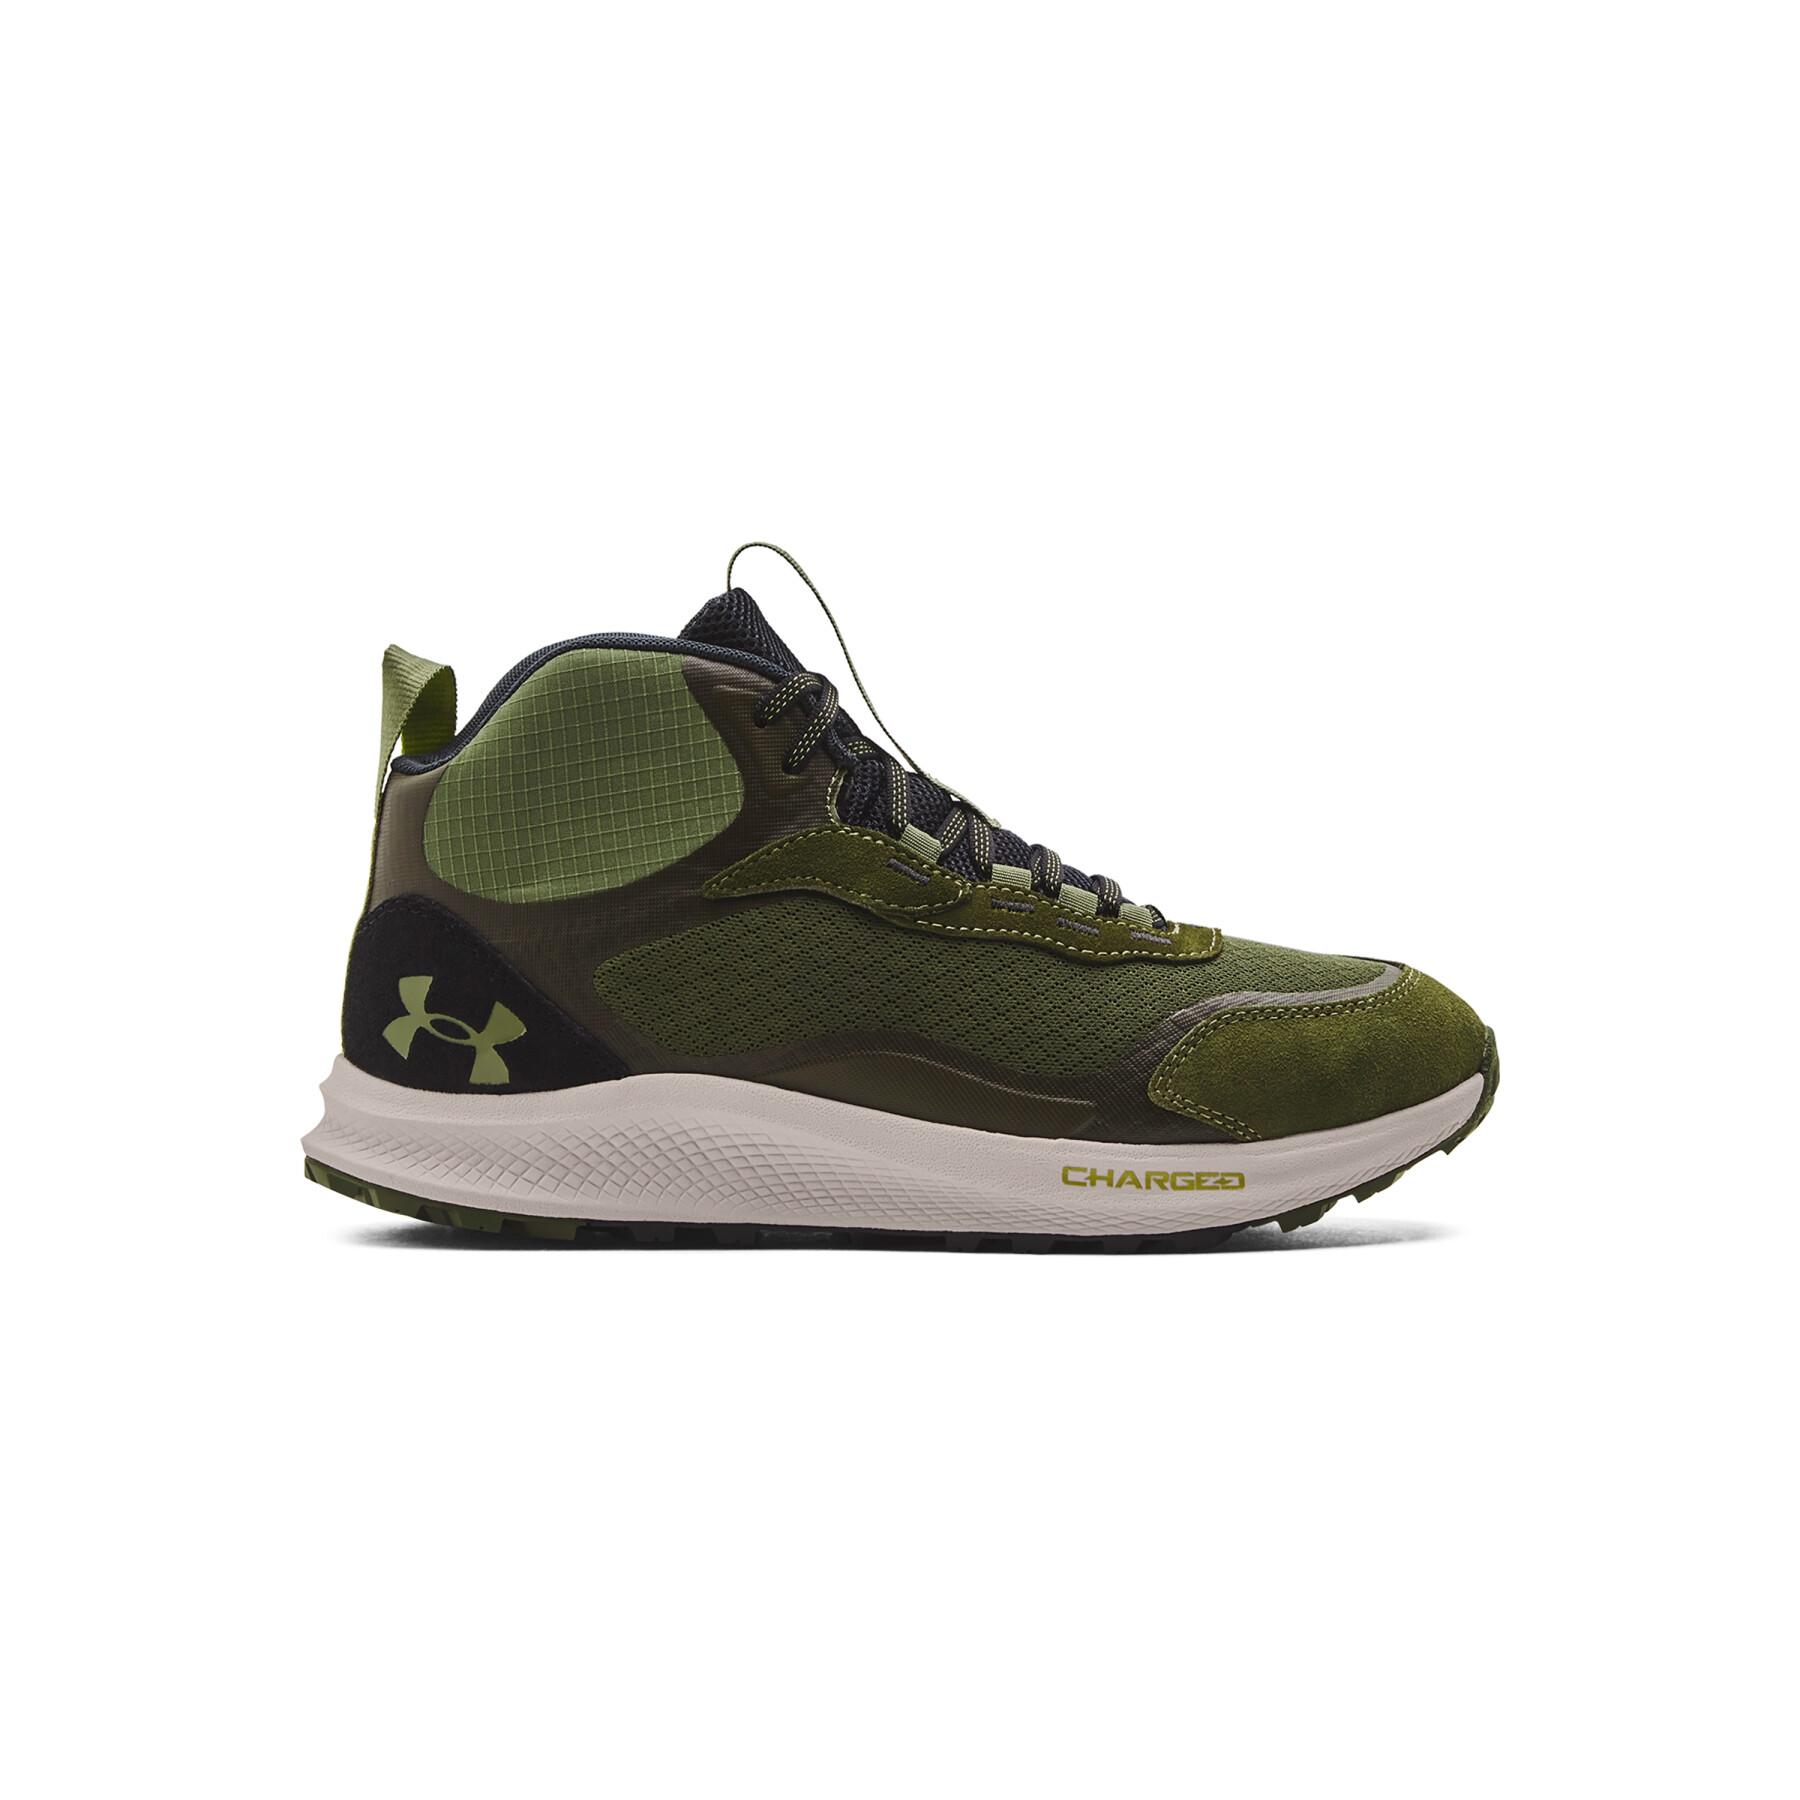 Hiking shoes Under Armour Charged Bandit Trek 2